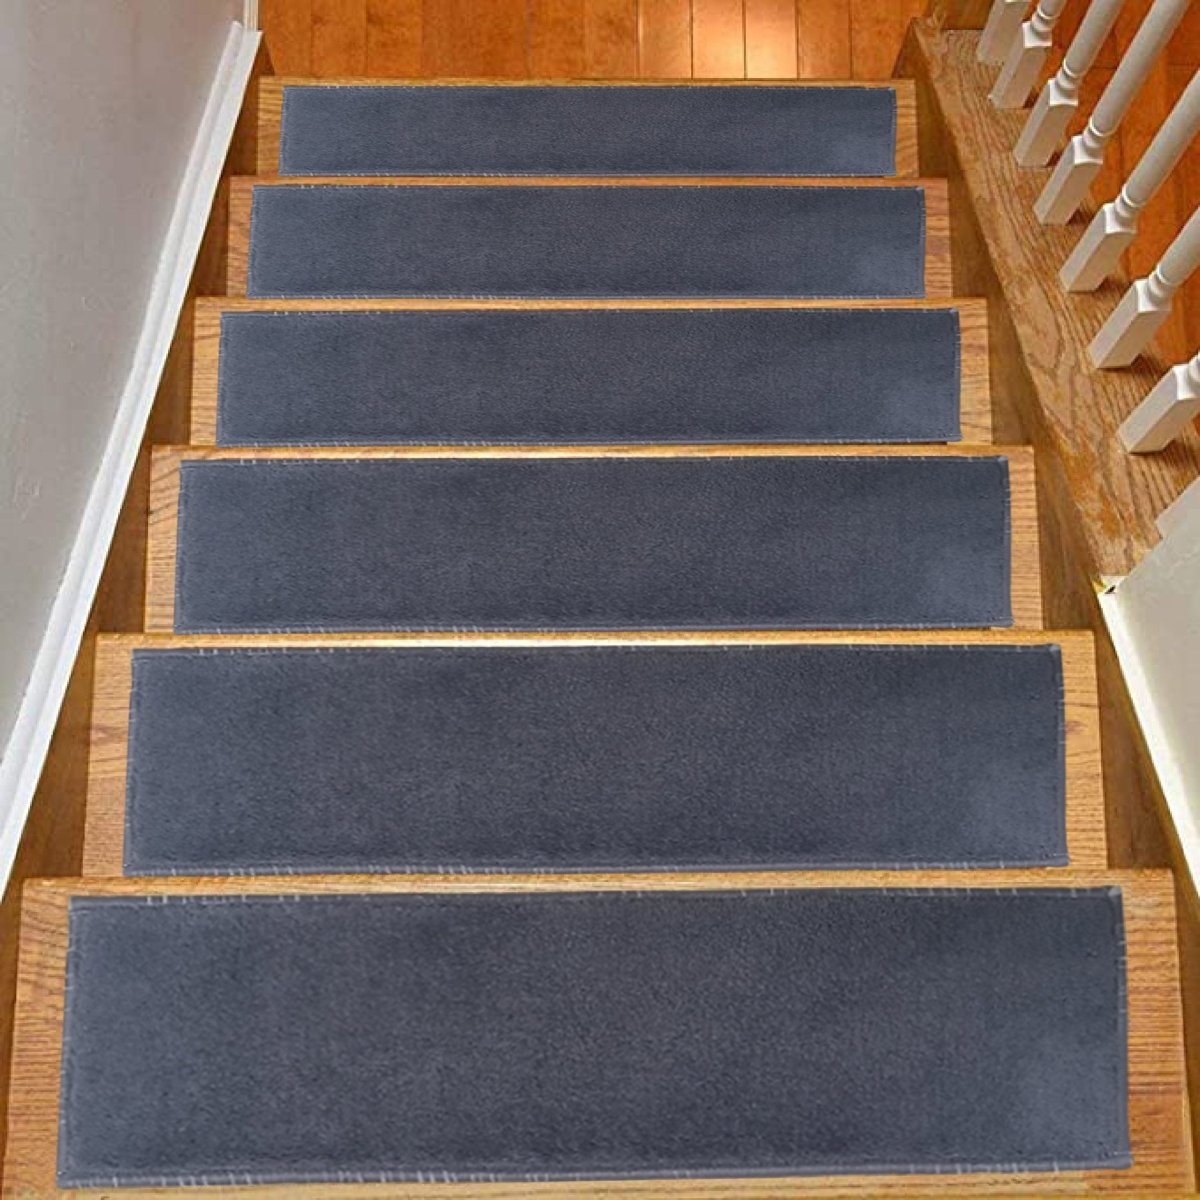 Stair Treads Carpet Shaggy, Fluffy Anthracite, Stair Carpet, Aesthetic Stair Runner, Ultra Thin Stair Mat, Modern Step Pad, Stairs Rug - Slips Away - 1576972508_3982286875 -